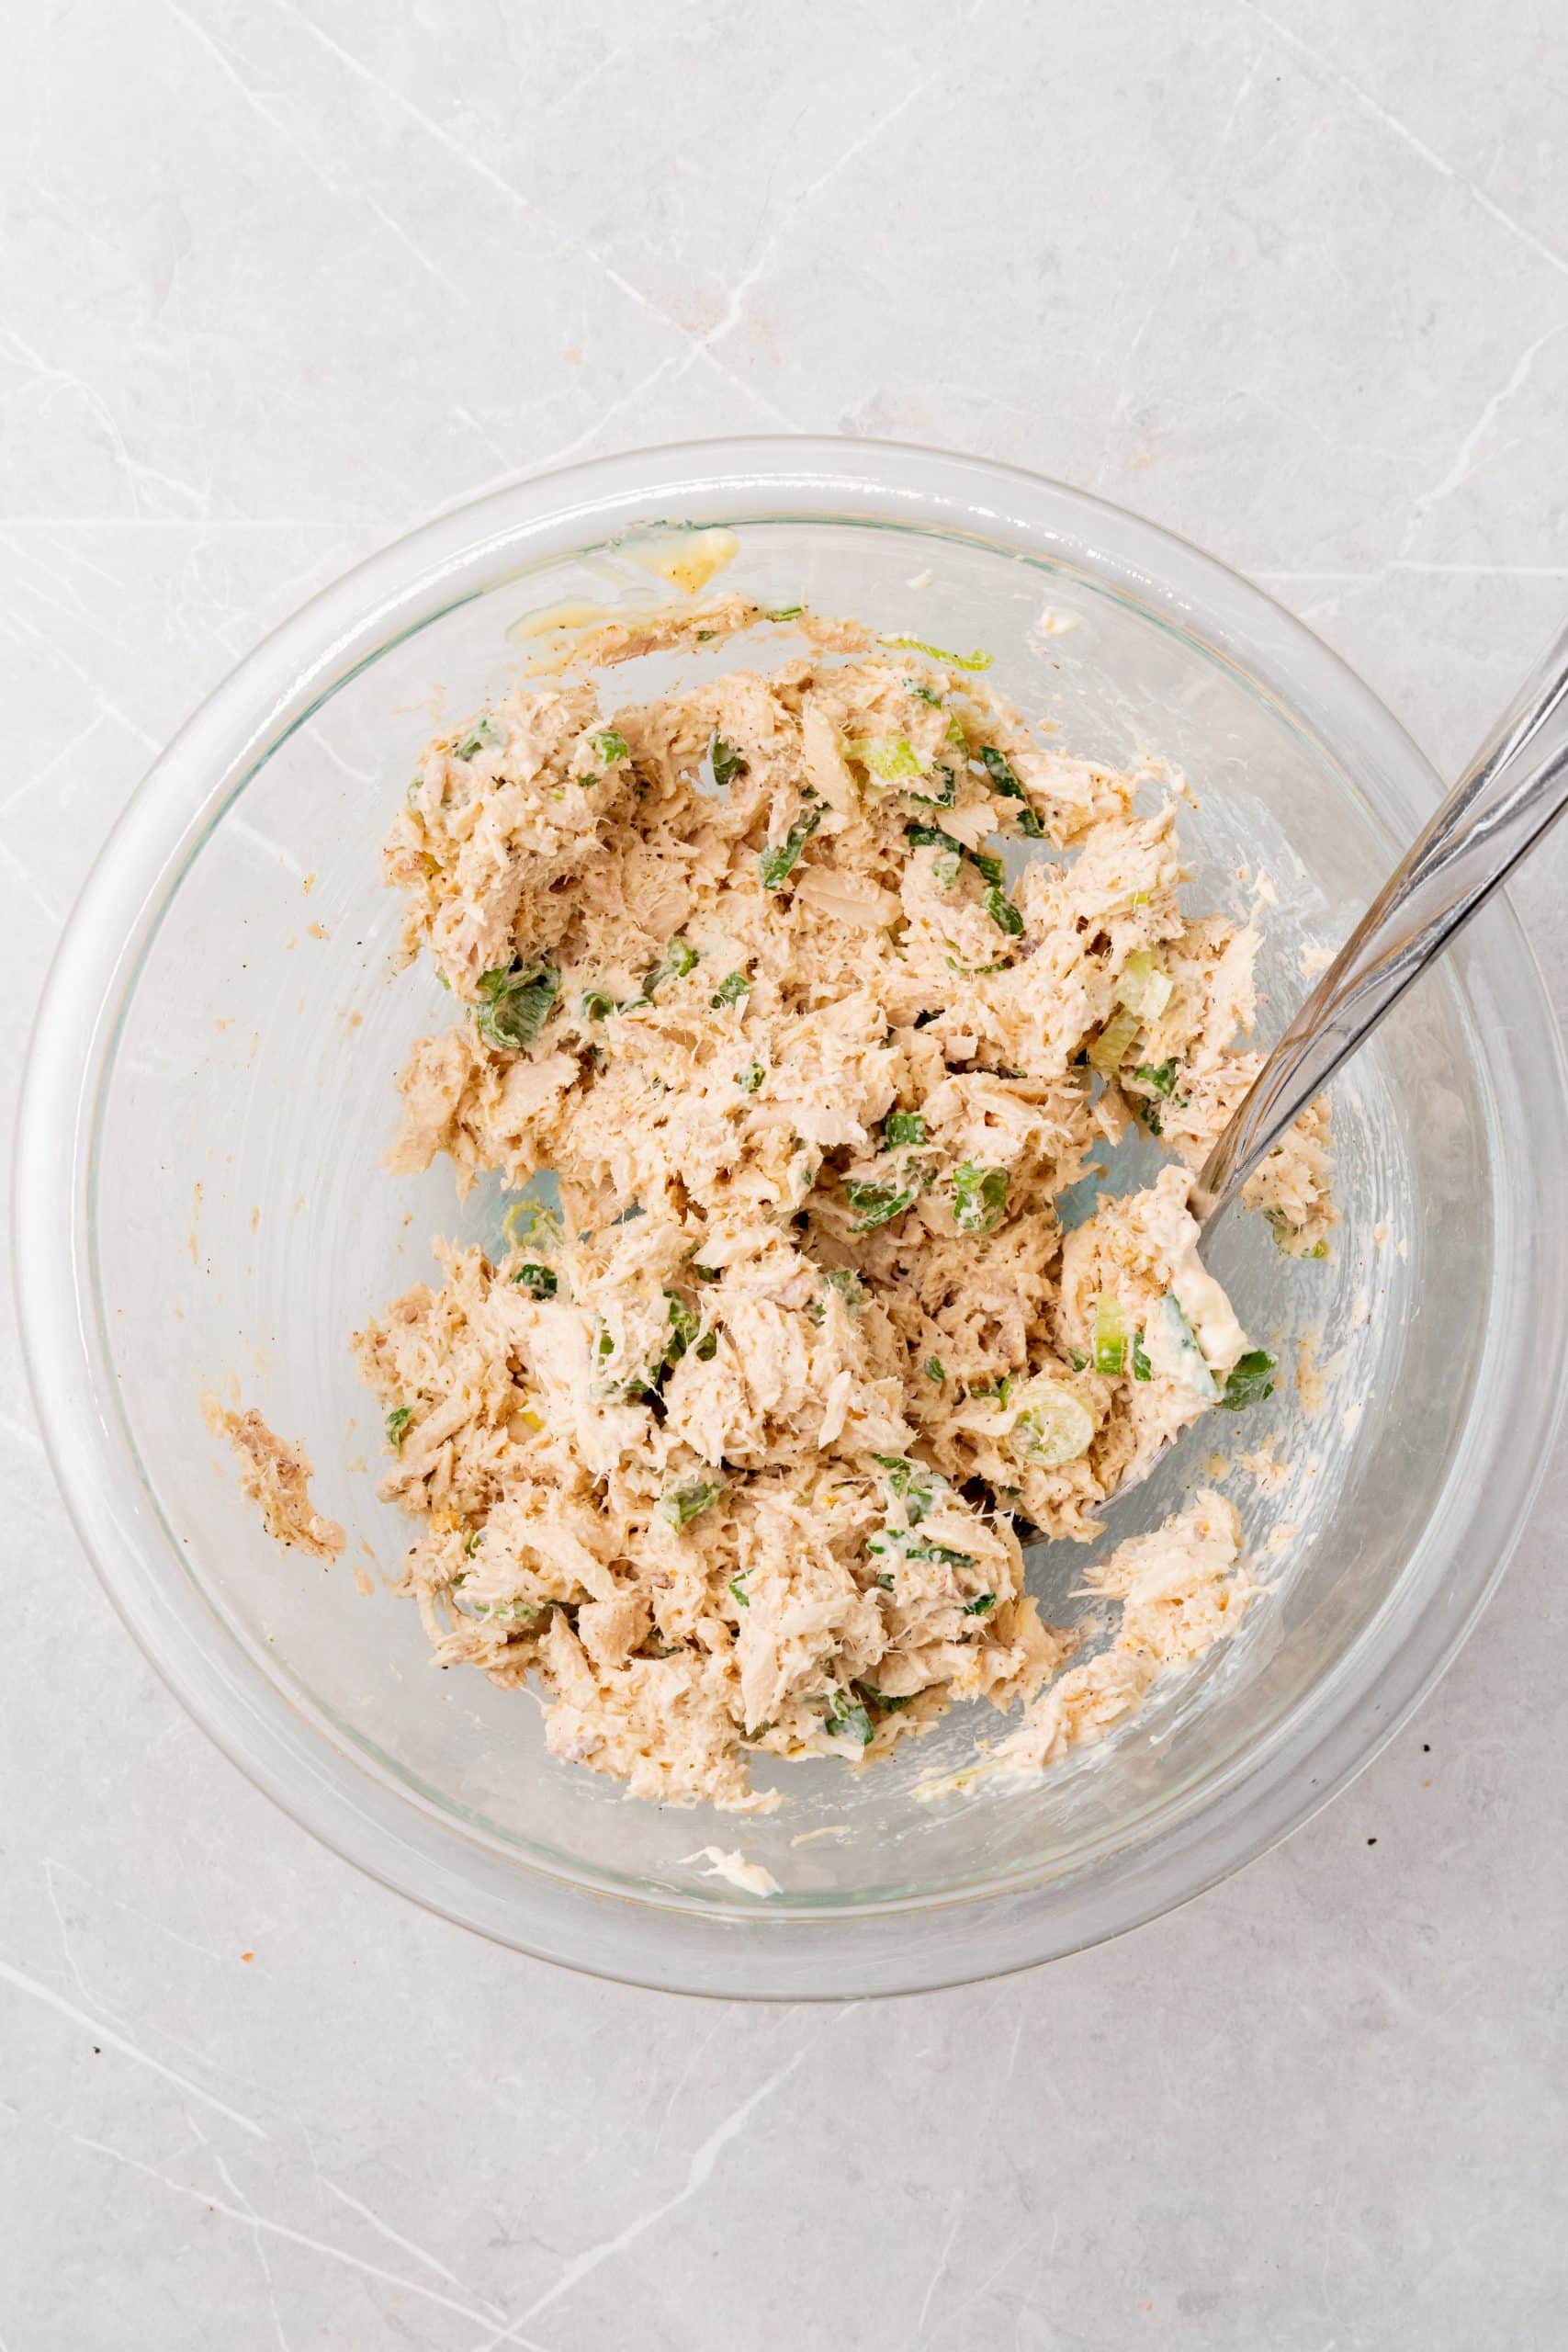 homemade creamy tuna salad mixed together in a glass bowl with a silver fork on the side